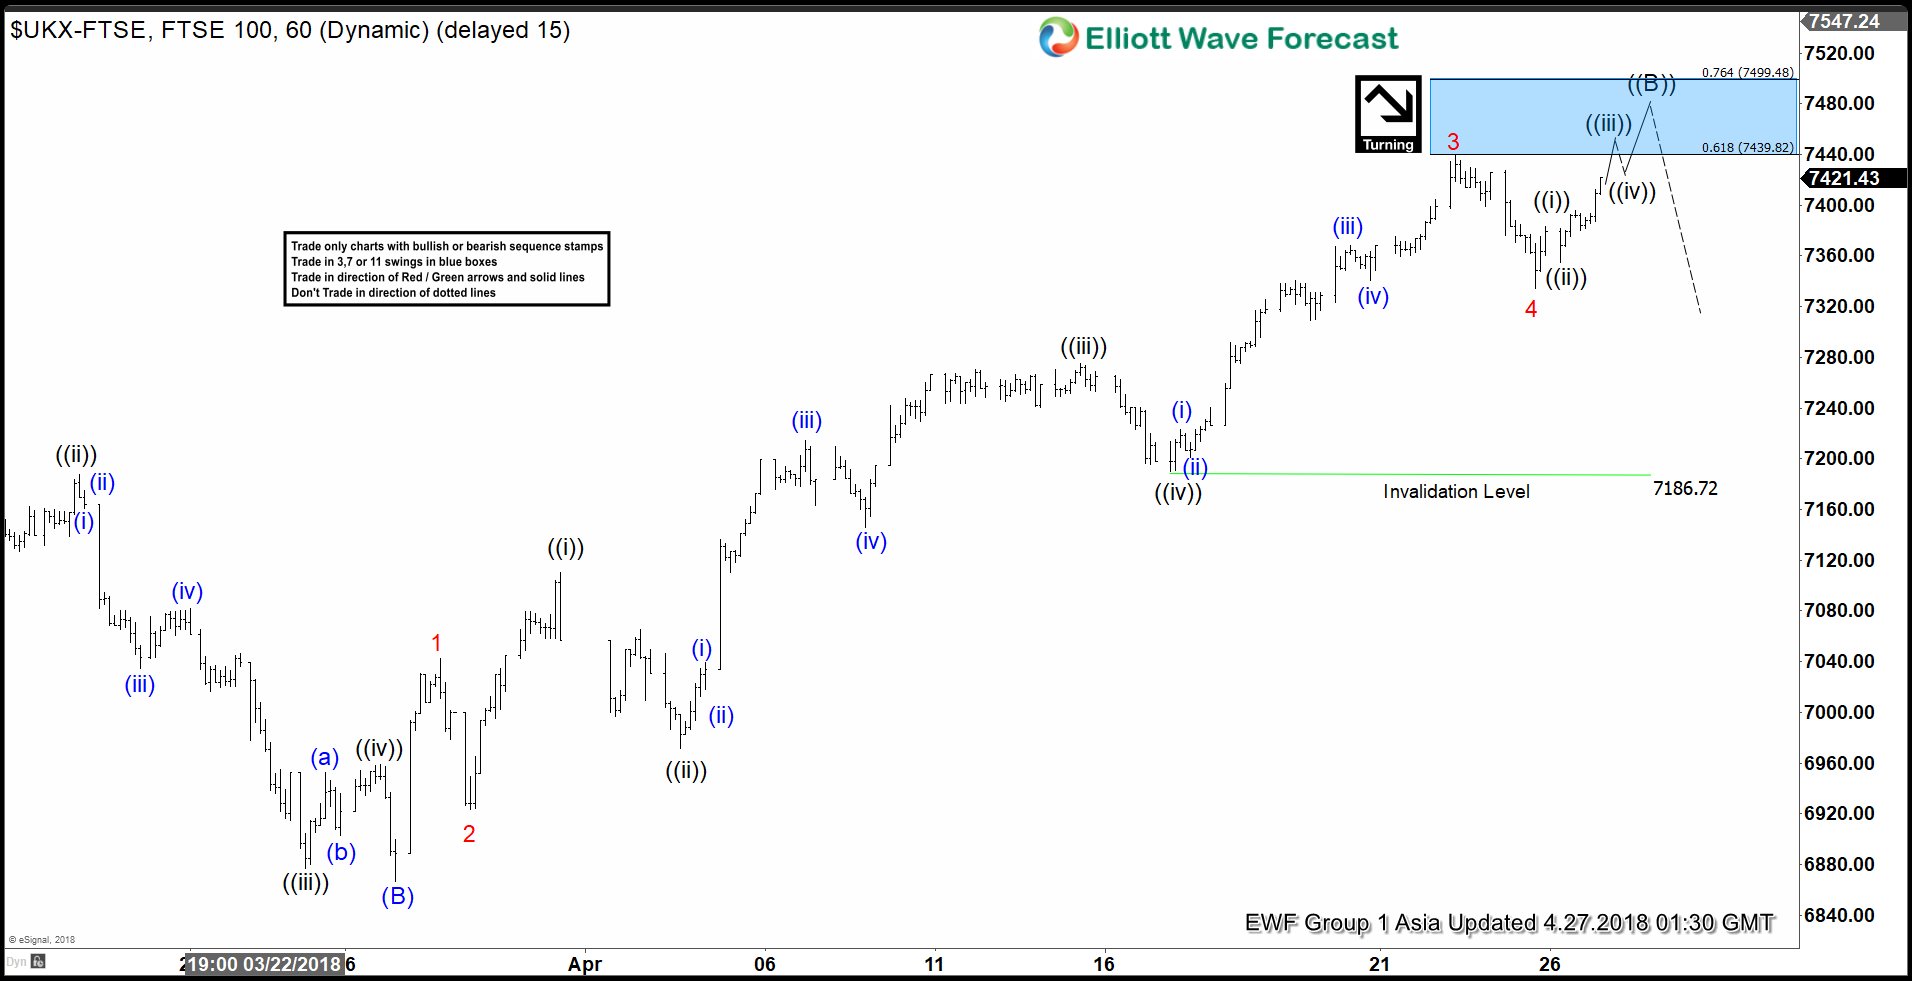 Does Elliott Wave View Suggest A Turn In FTSE Is Imminent?